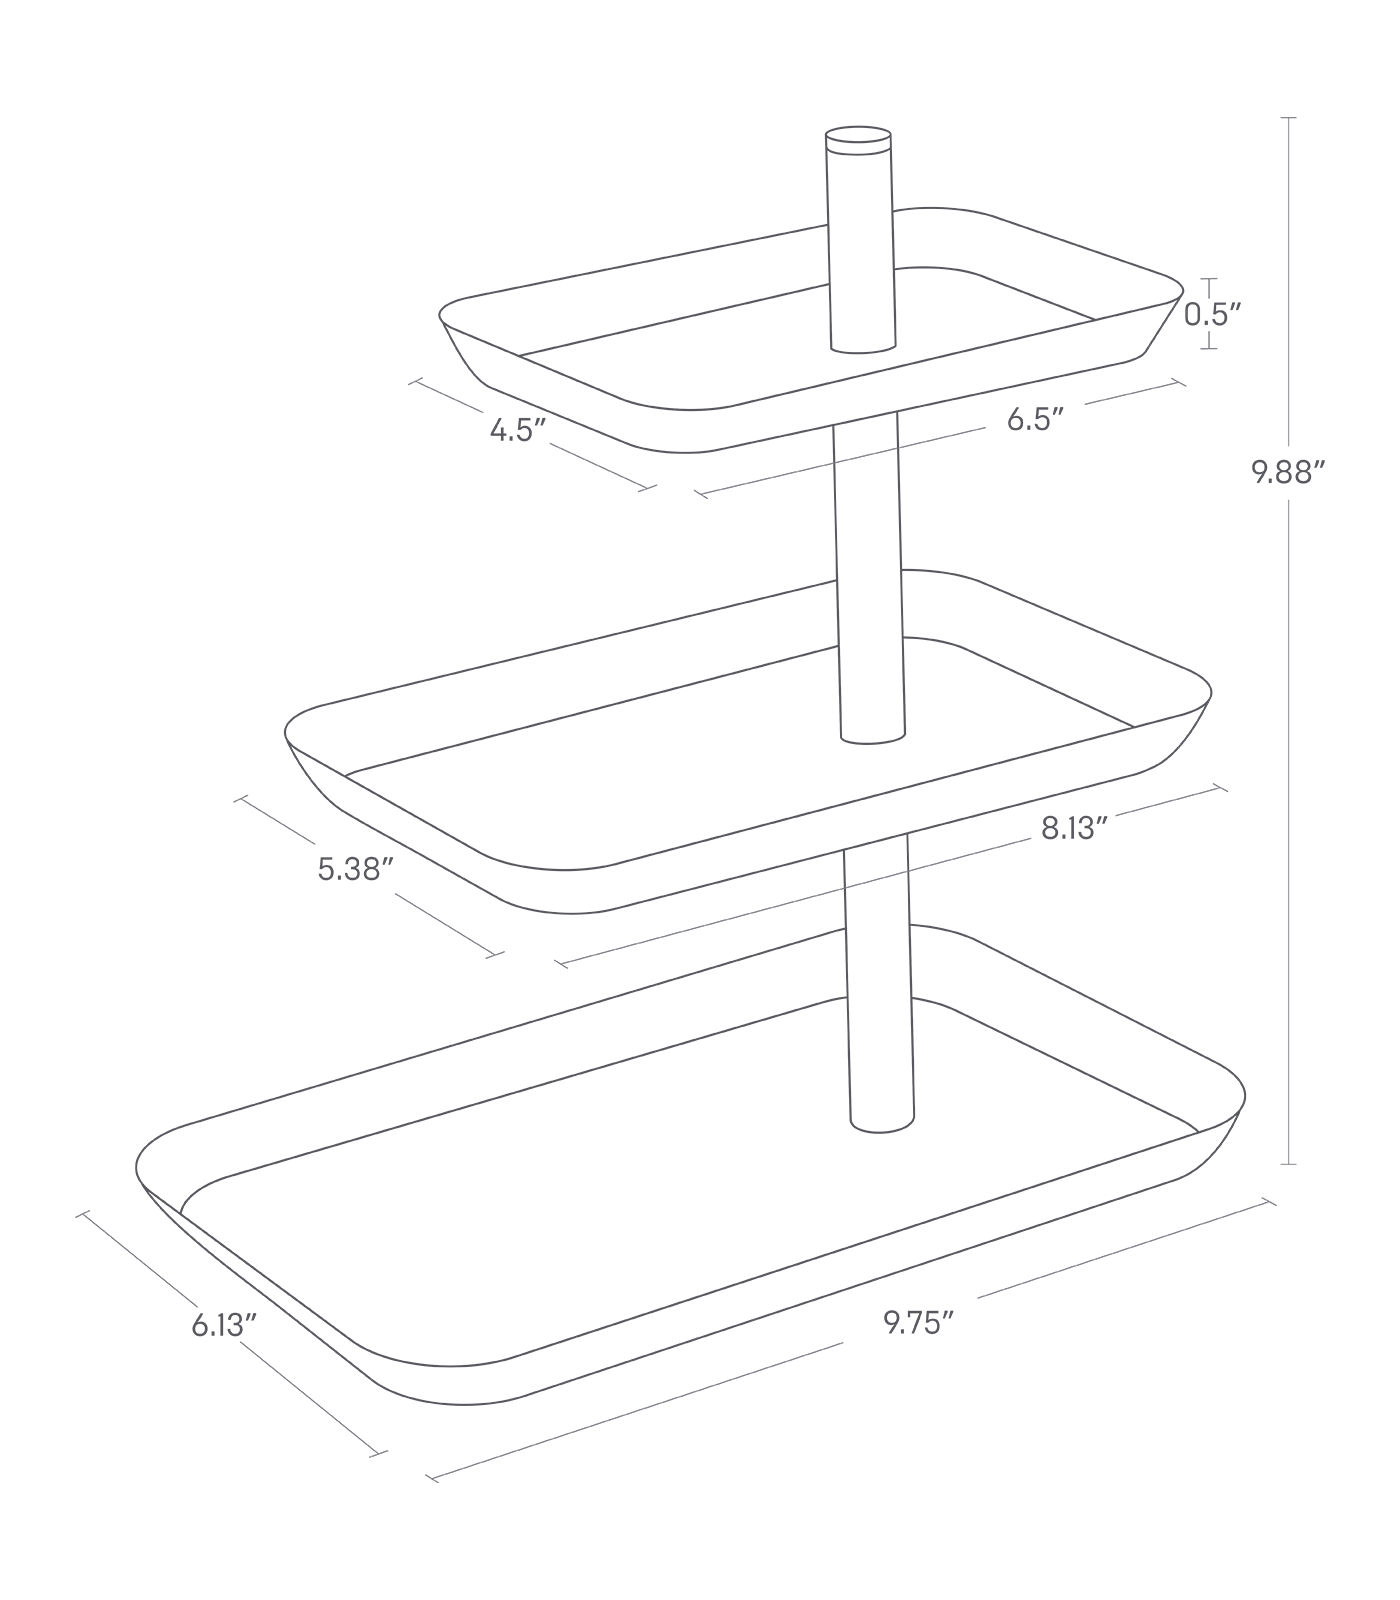 Dimension Image for Three Tier Accessory Tray on a white background showing height of 9.88